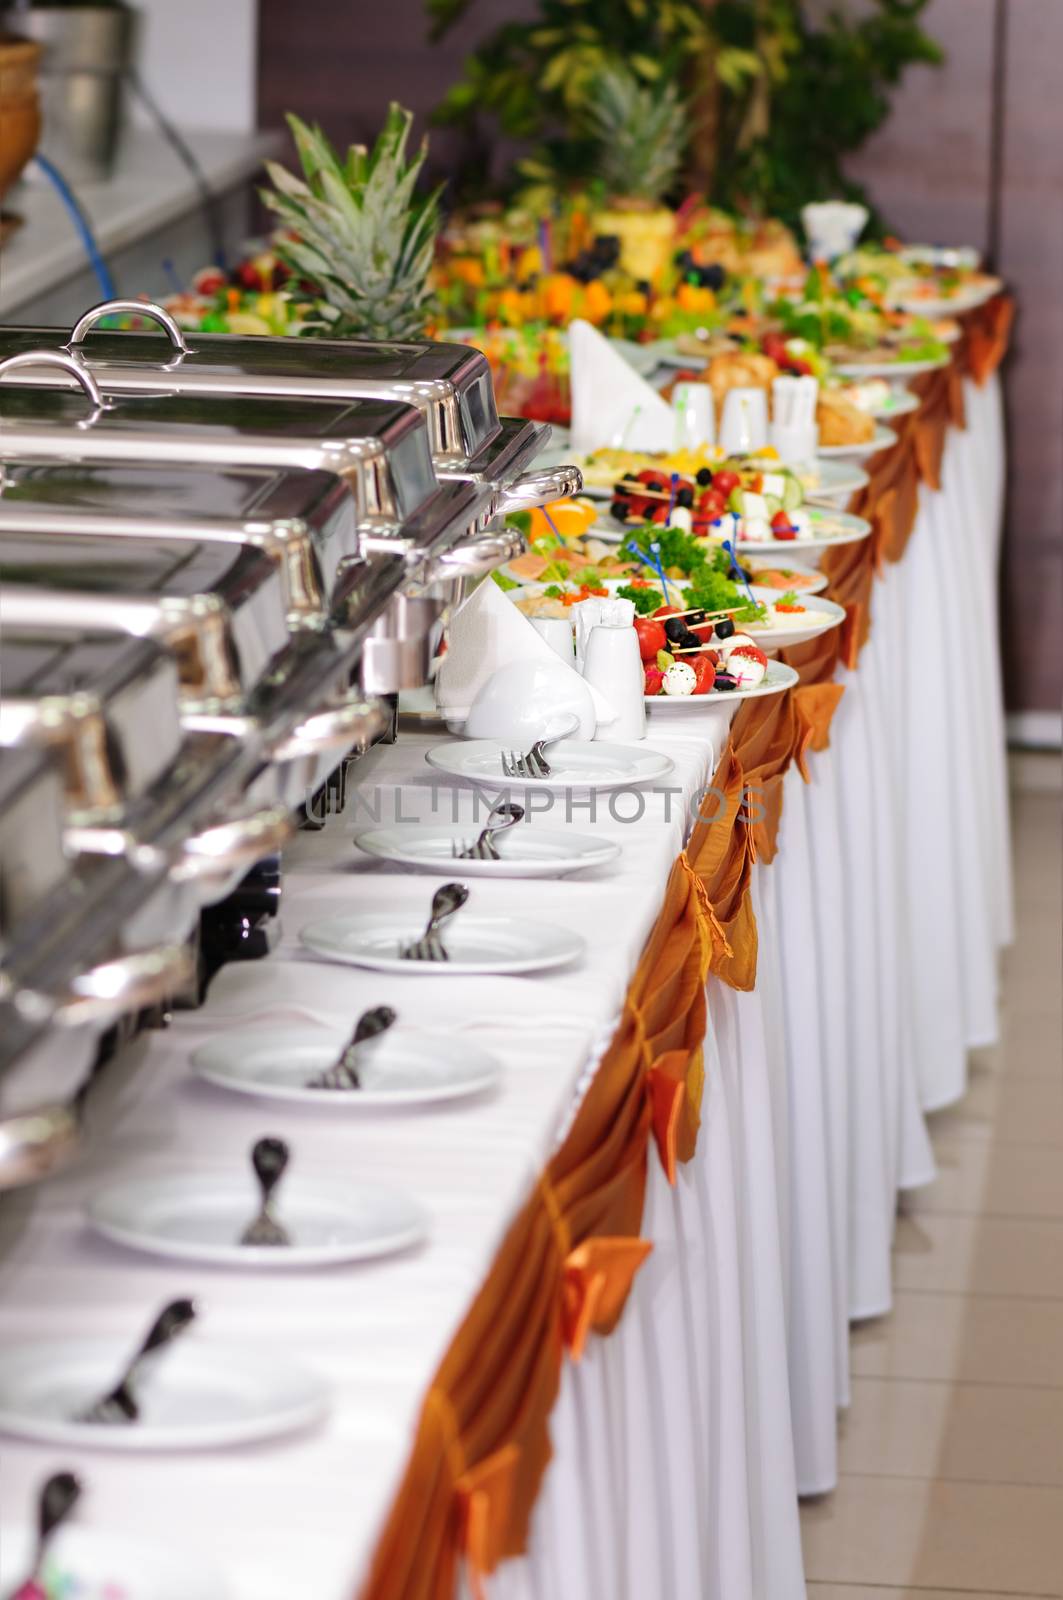 chafing dishes at table ready for wedding catering